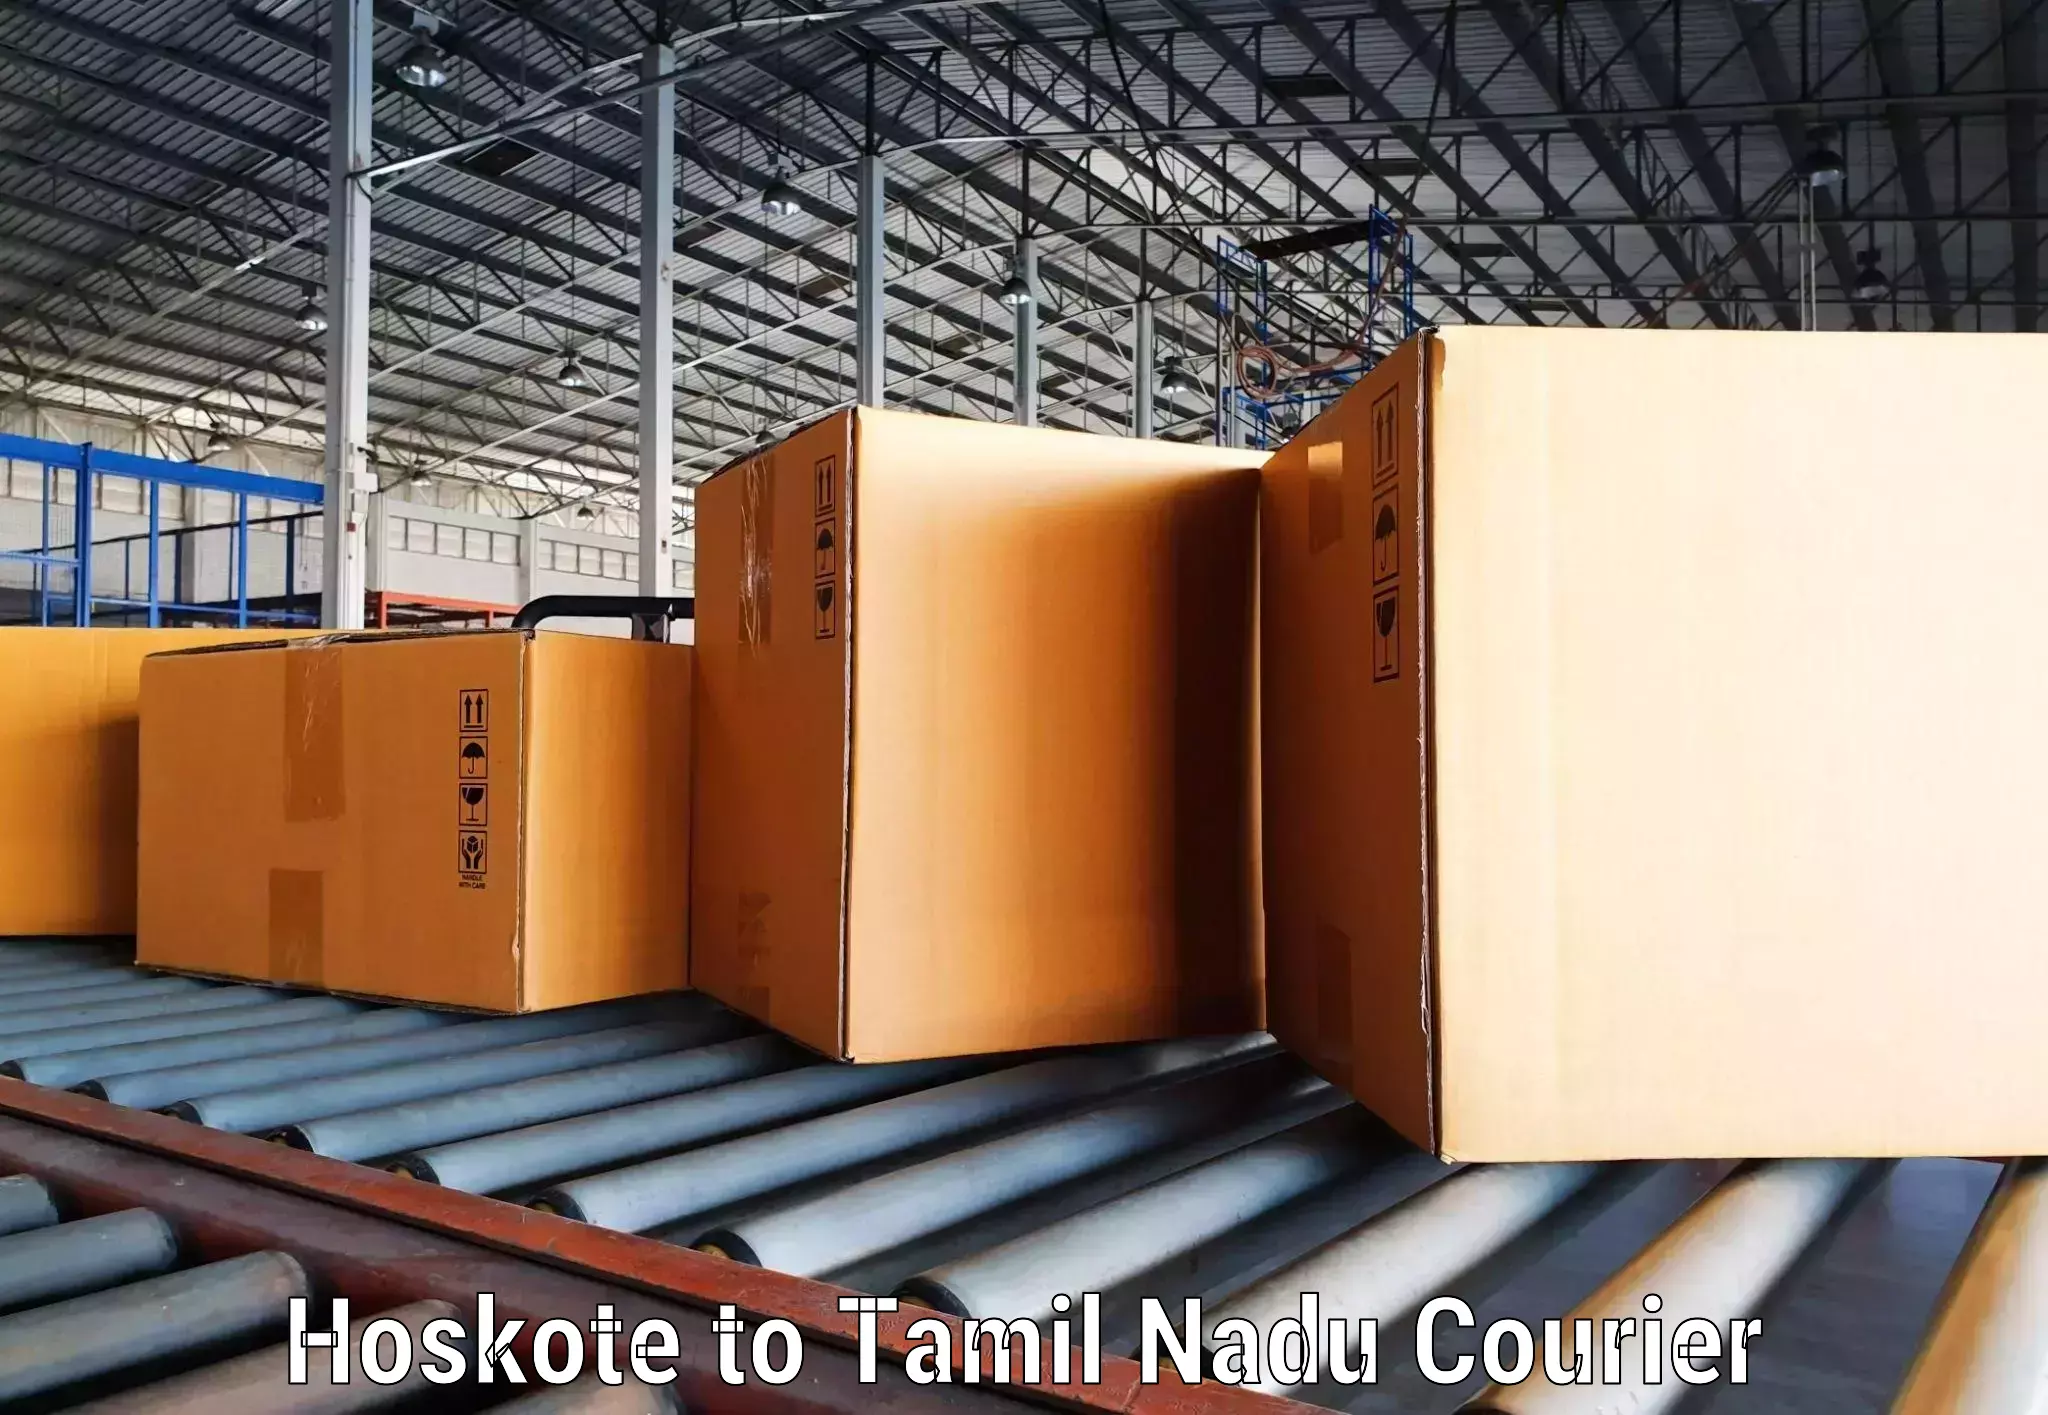 24/7 shipping services Hoskote to Tamil Nadu